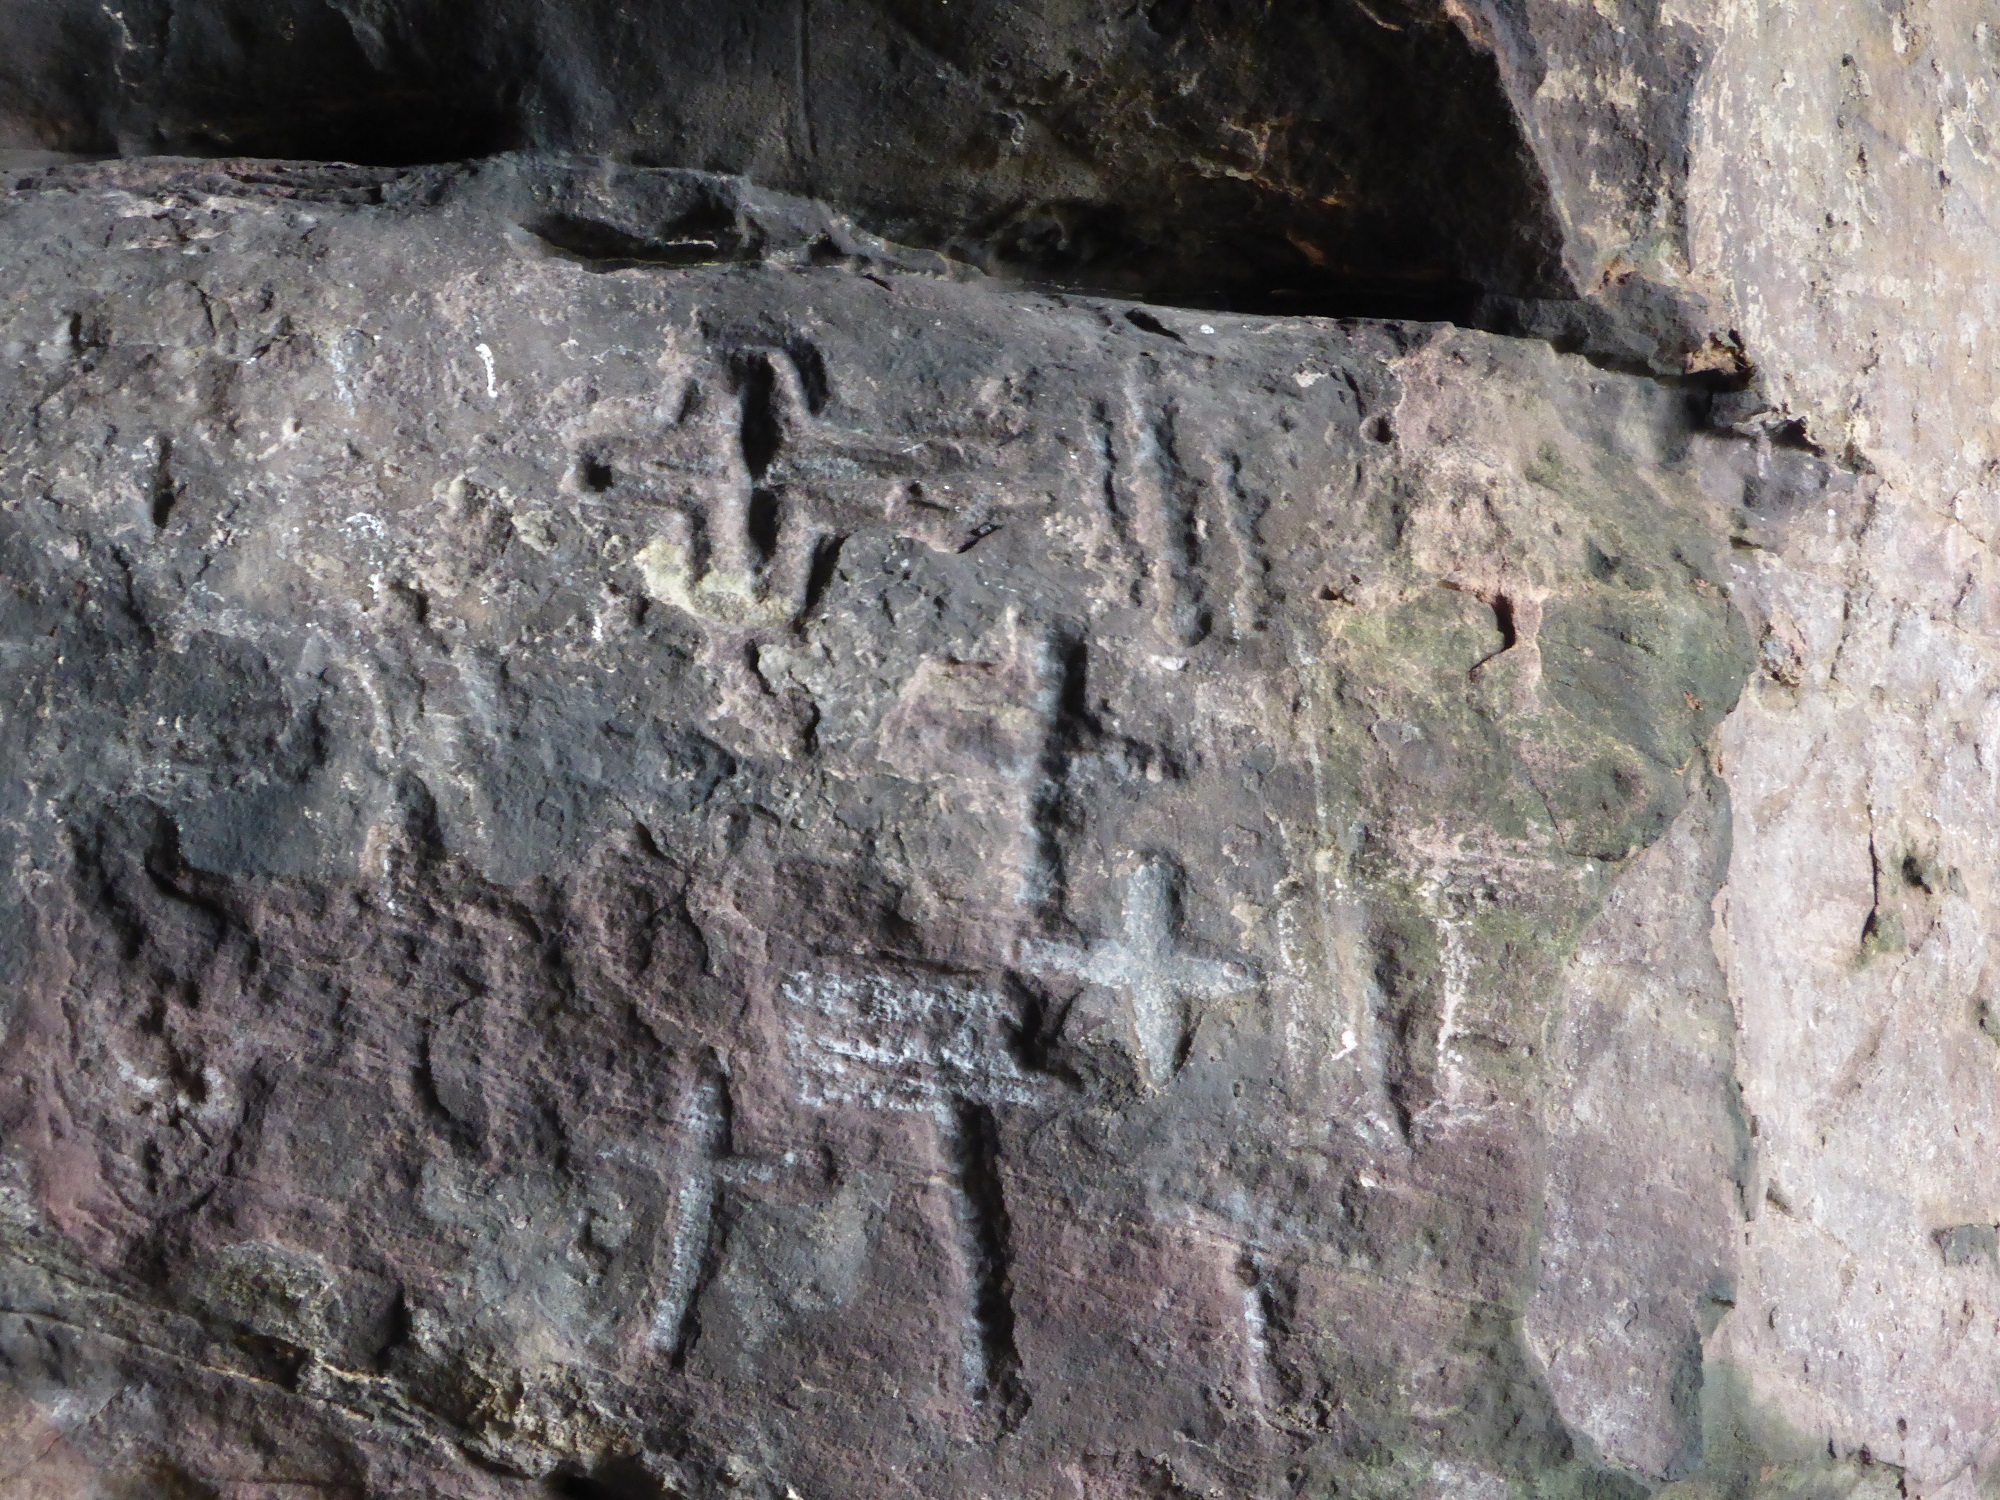 Detail of cross carvings, north wall towards front of cave